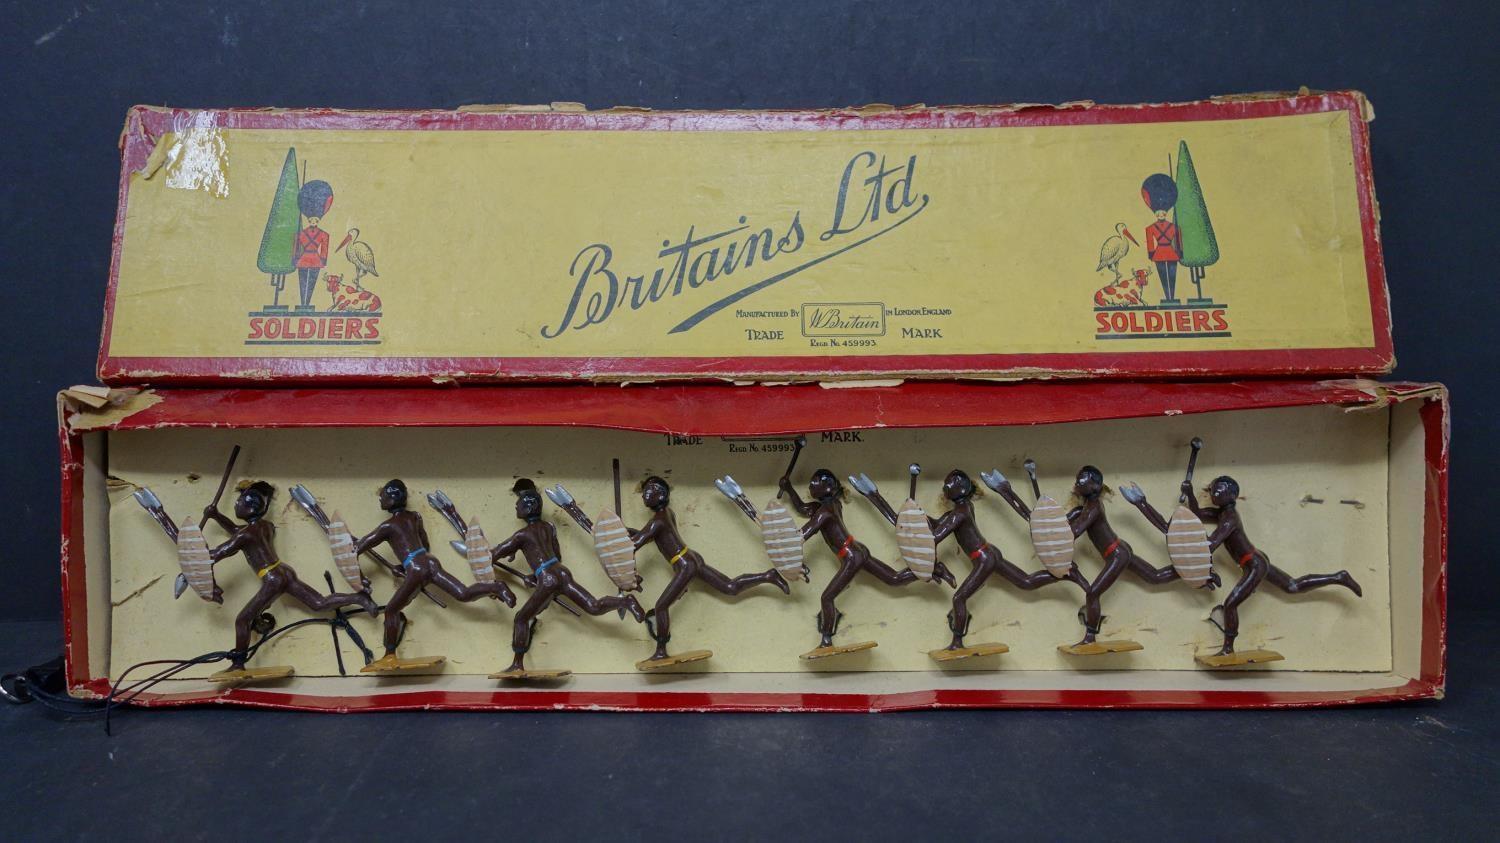 A boxed set of vintage lead figures of Zulu warriors by William Britain